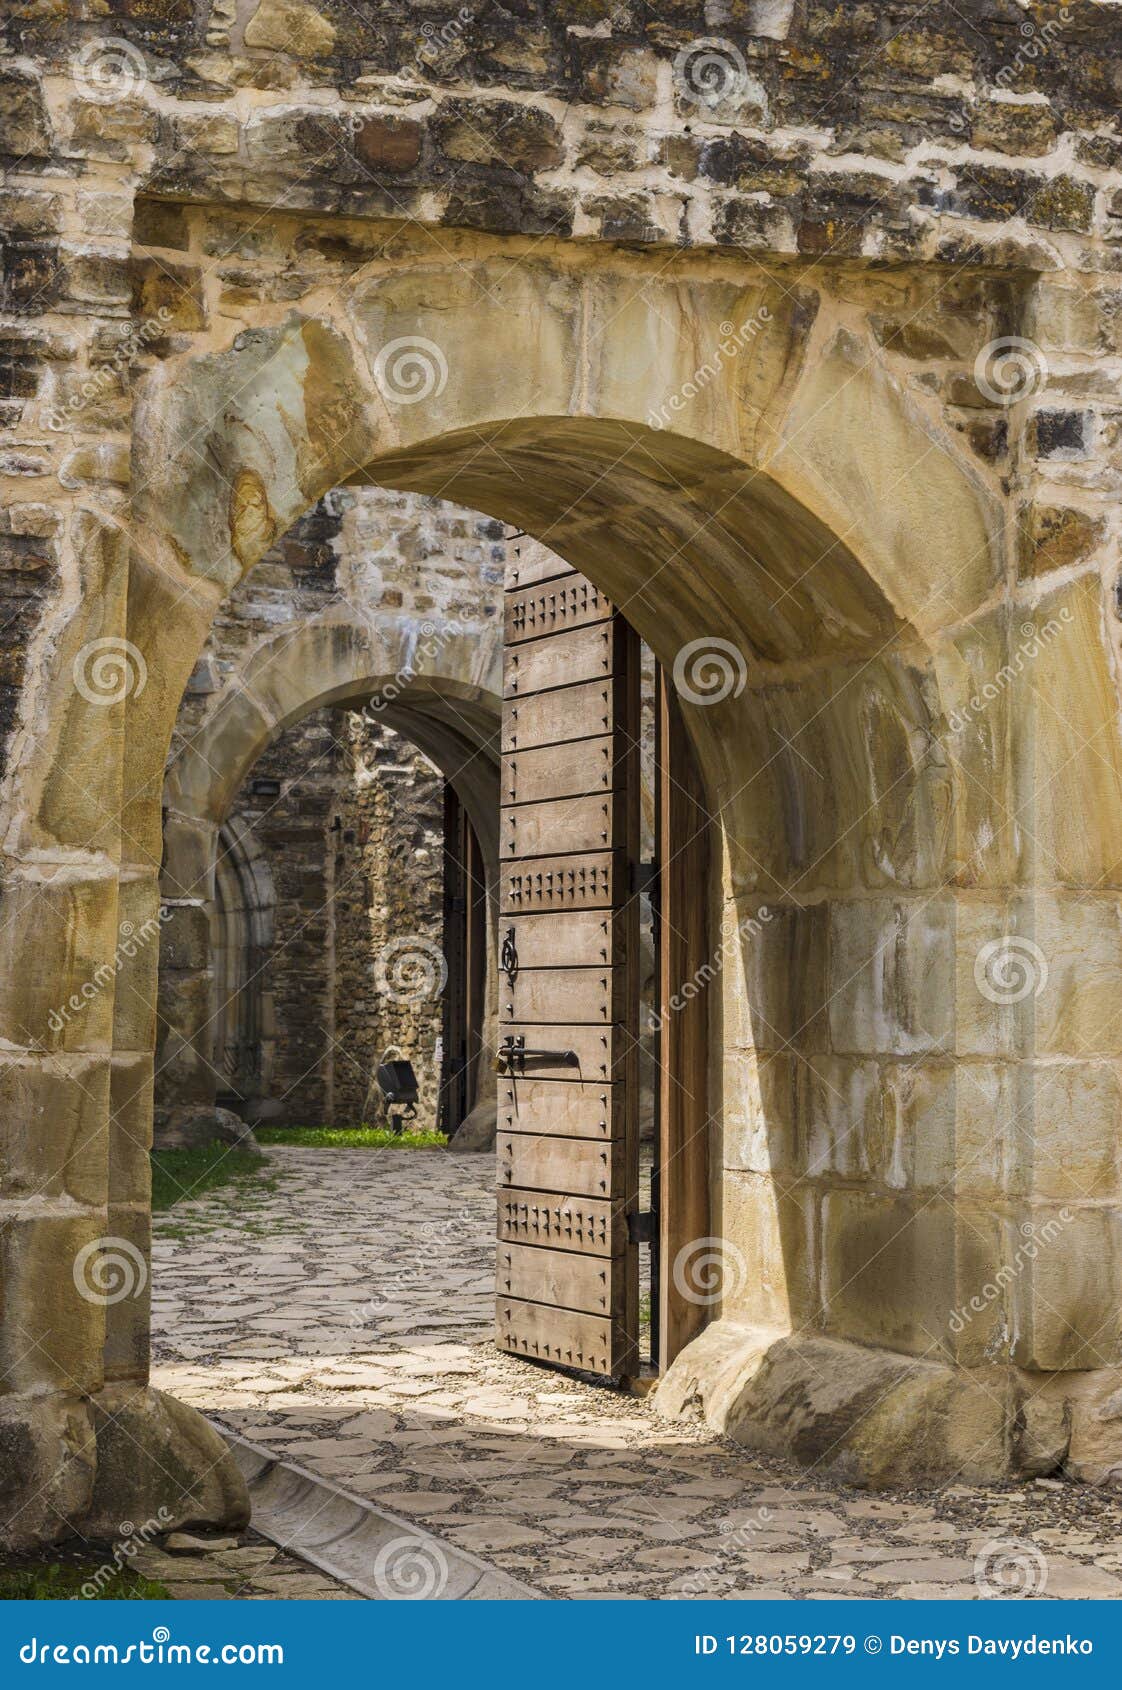 Medieval castle gate stock image. Image of arch, open - 128059279